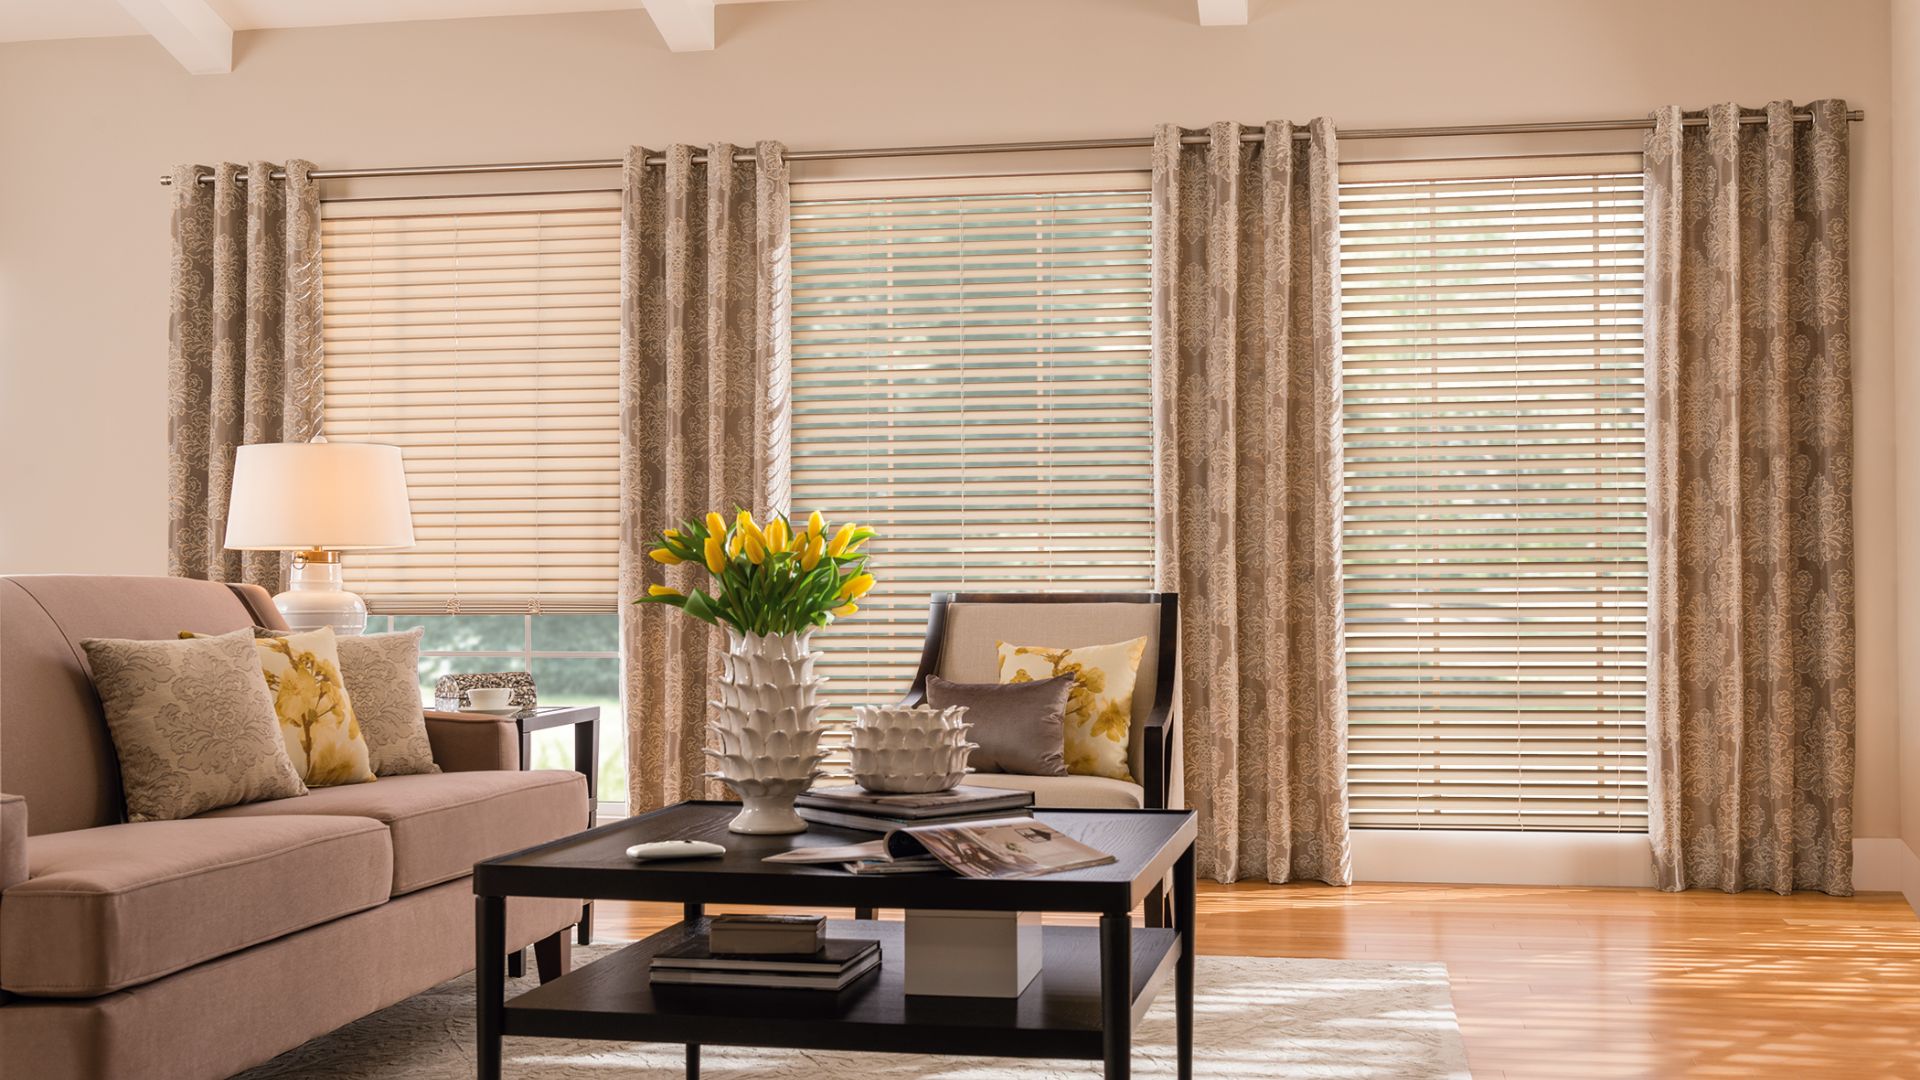 Cleaning and Maintenance Tips for Curtains and Blinds